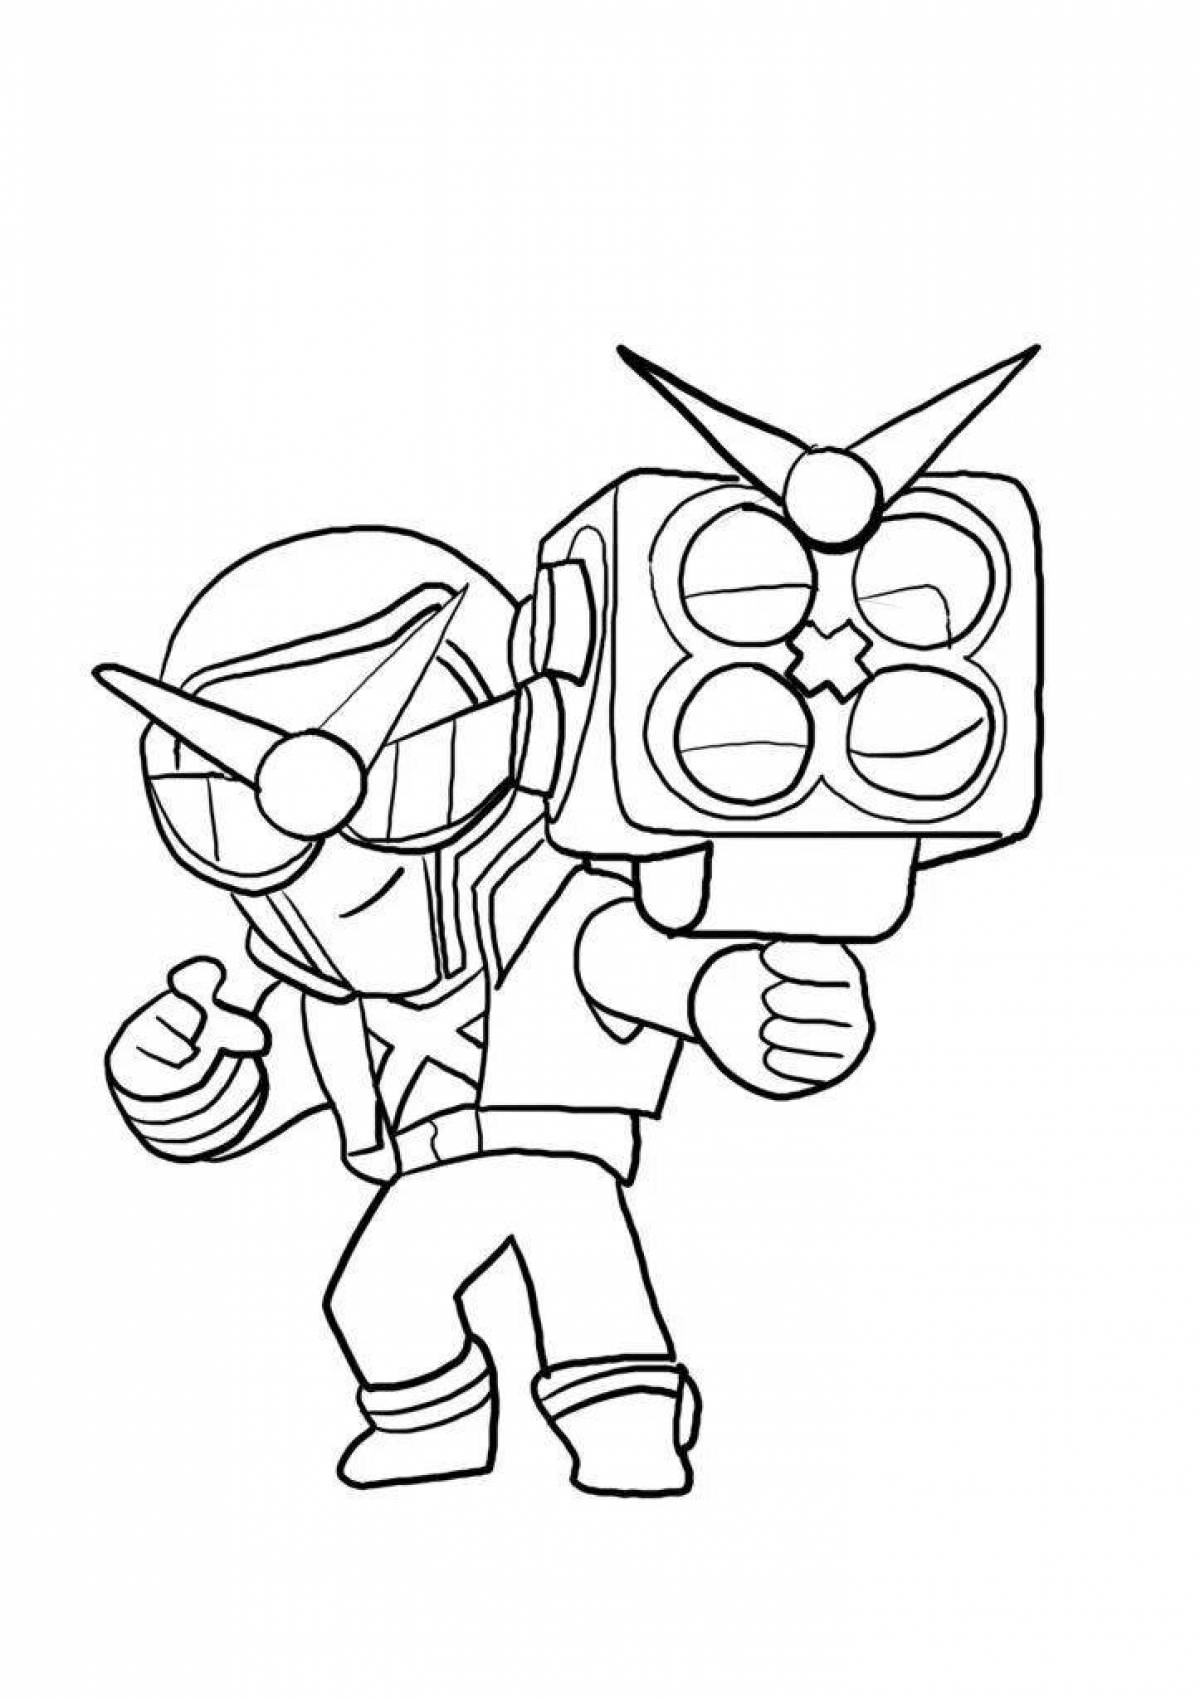 Animated brock coloring page